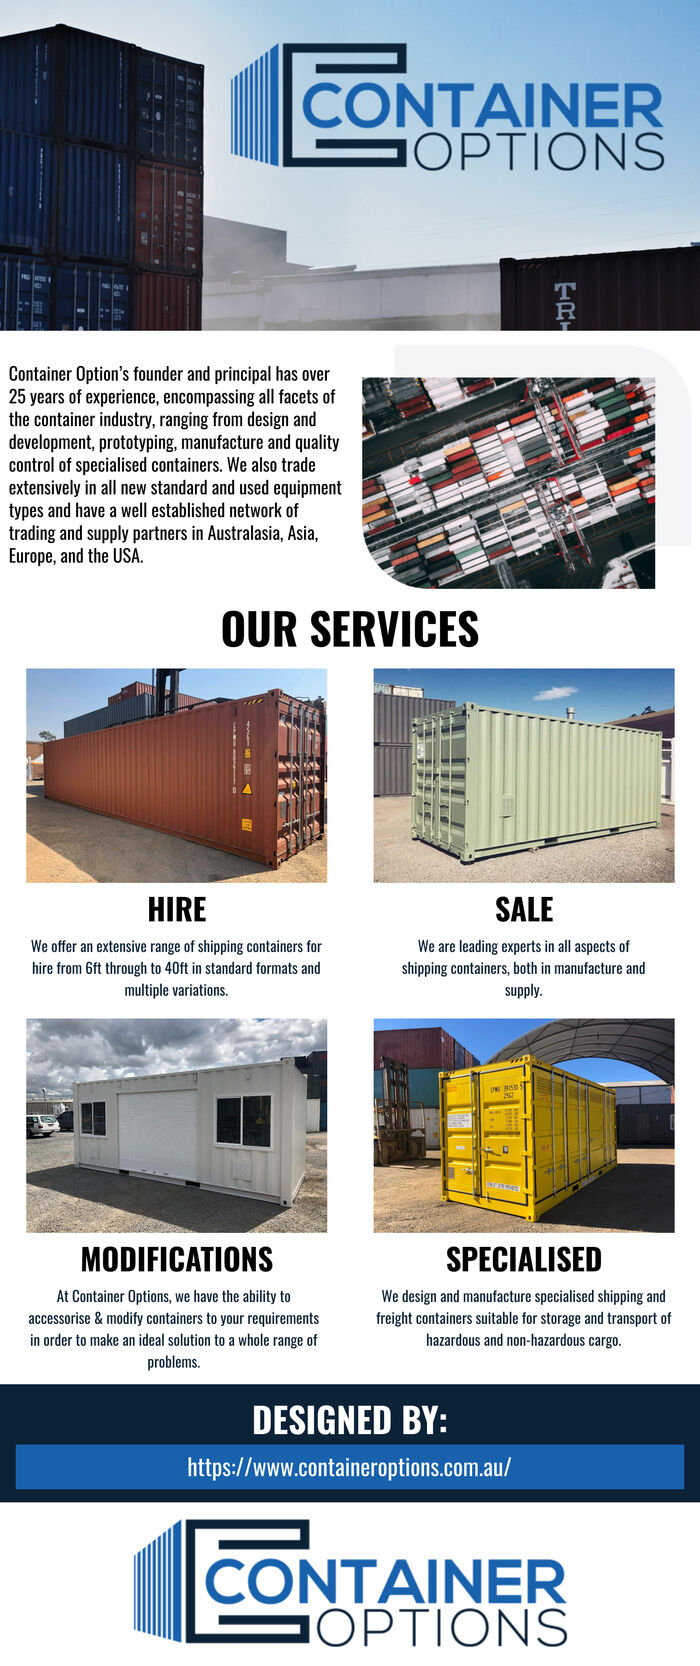 This infographics is designed by Container Options Pty Ltd